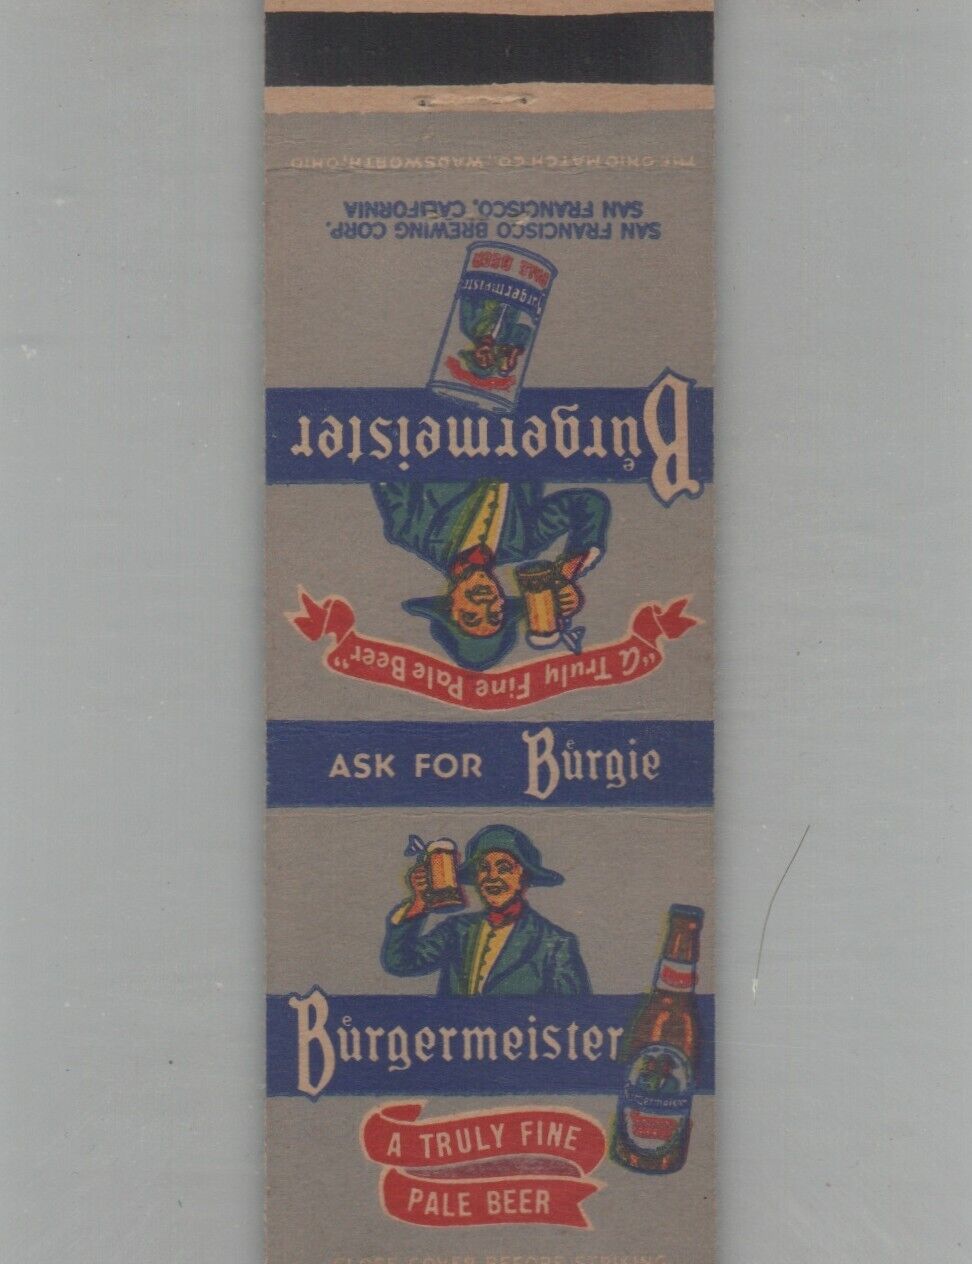 Matchbook Cover - Beer Burgermeister A Truly Fine Pale Beer